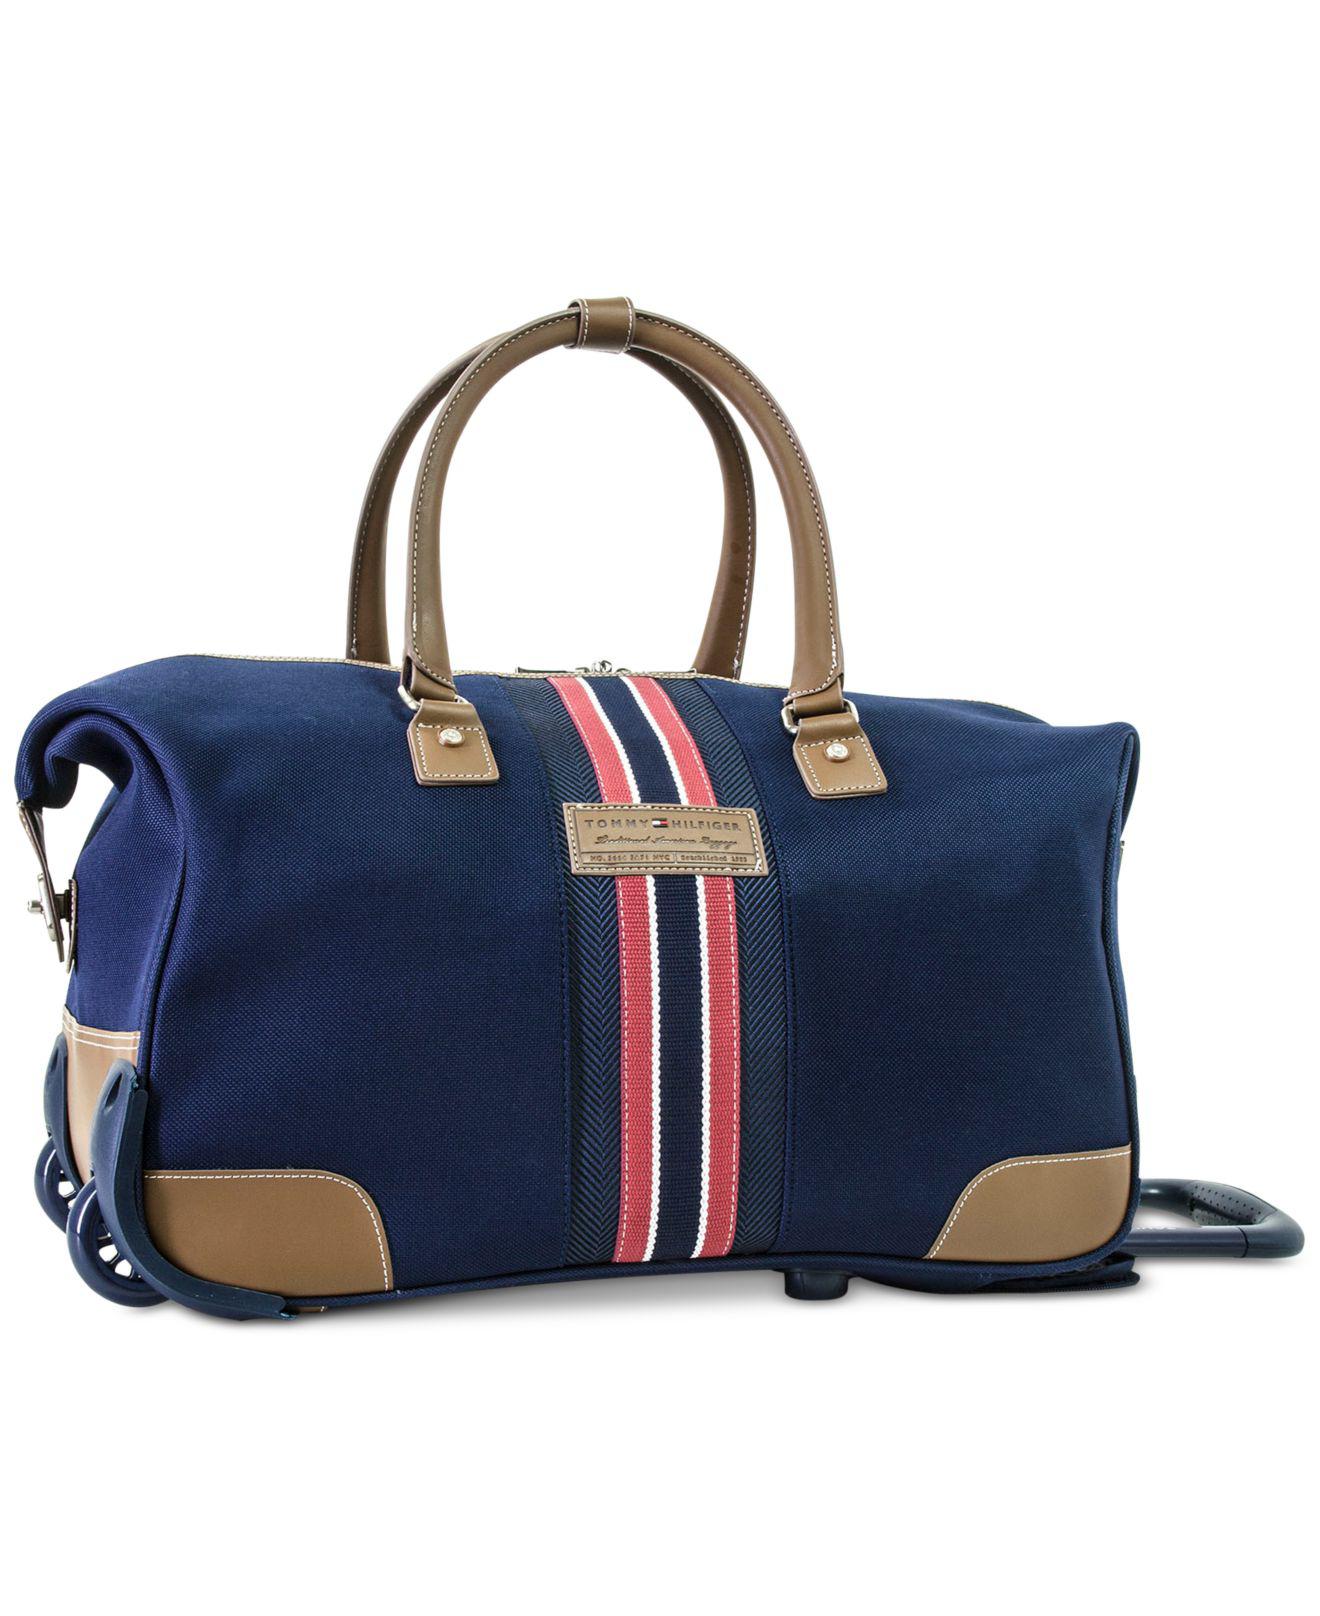 tommy hilfiger duffle bag with wheels